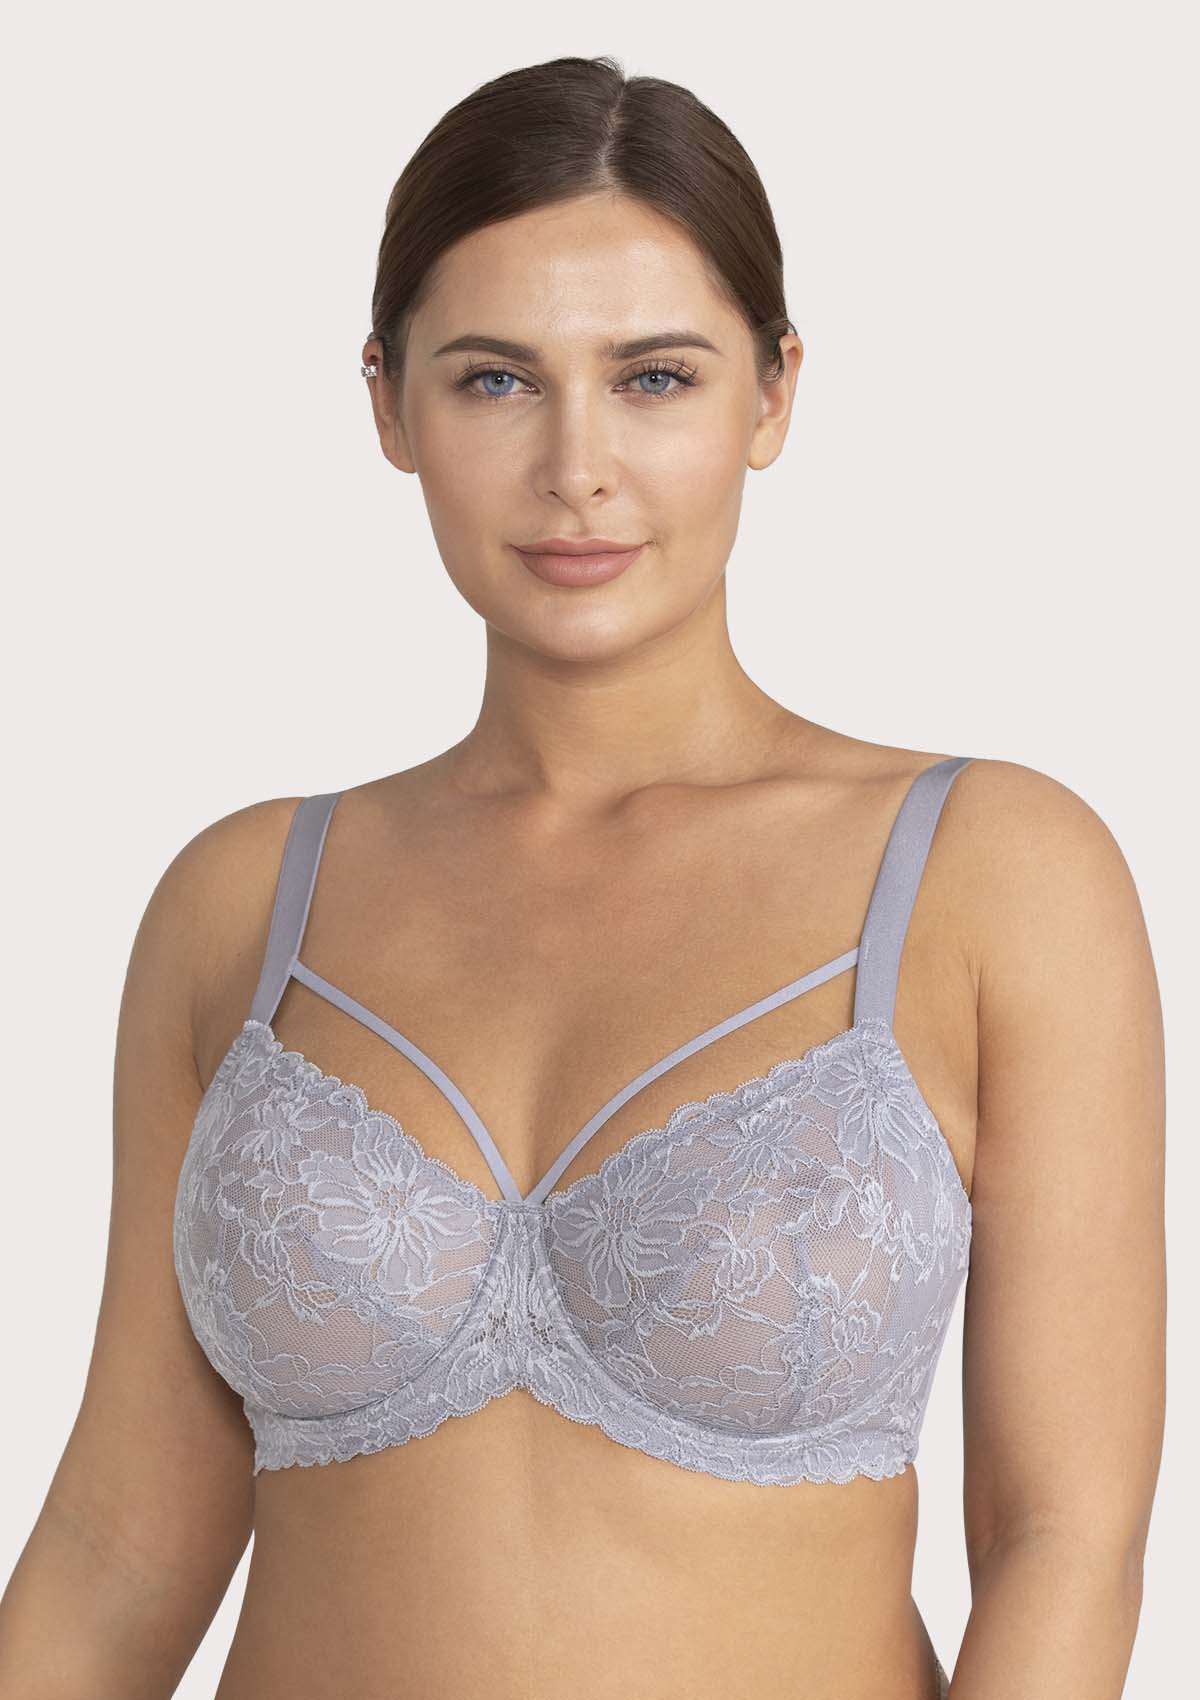 HSIA Pretty In Petals See-Through Lace Bra: Lift And Separate - Purple / 36 / C